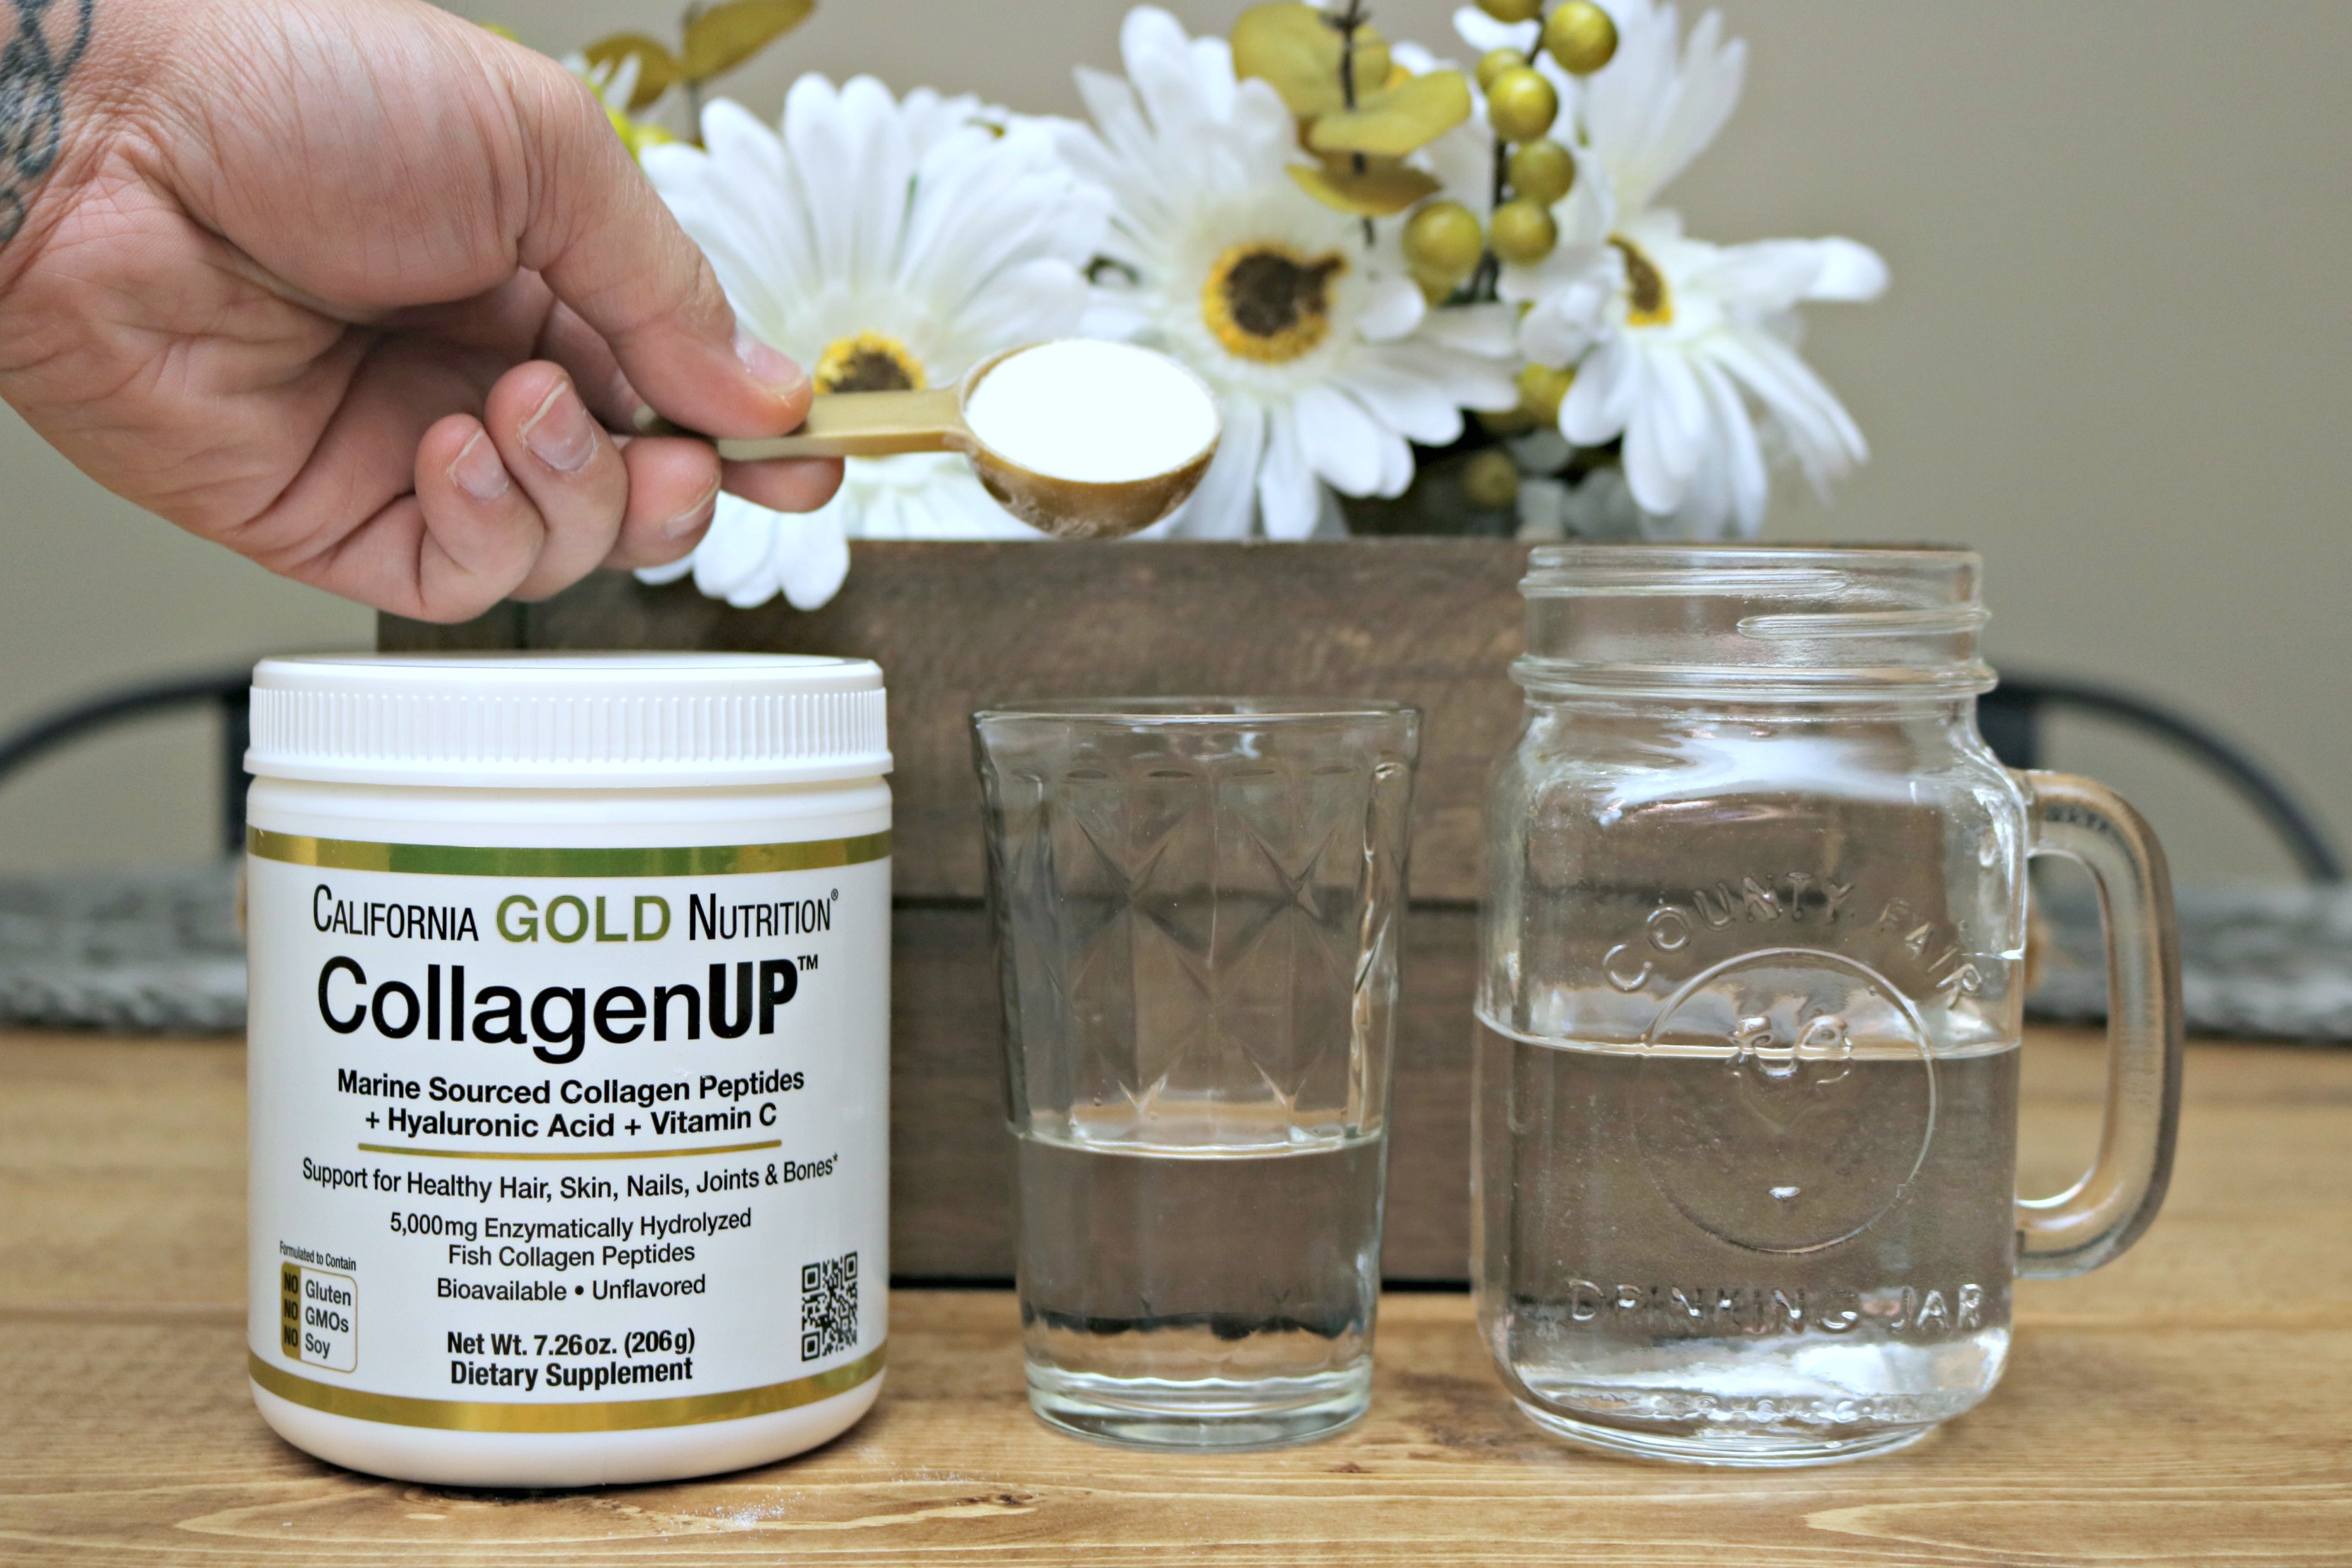 CollagenUP California Gold Nutrition being scooped into water.